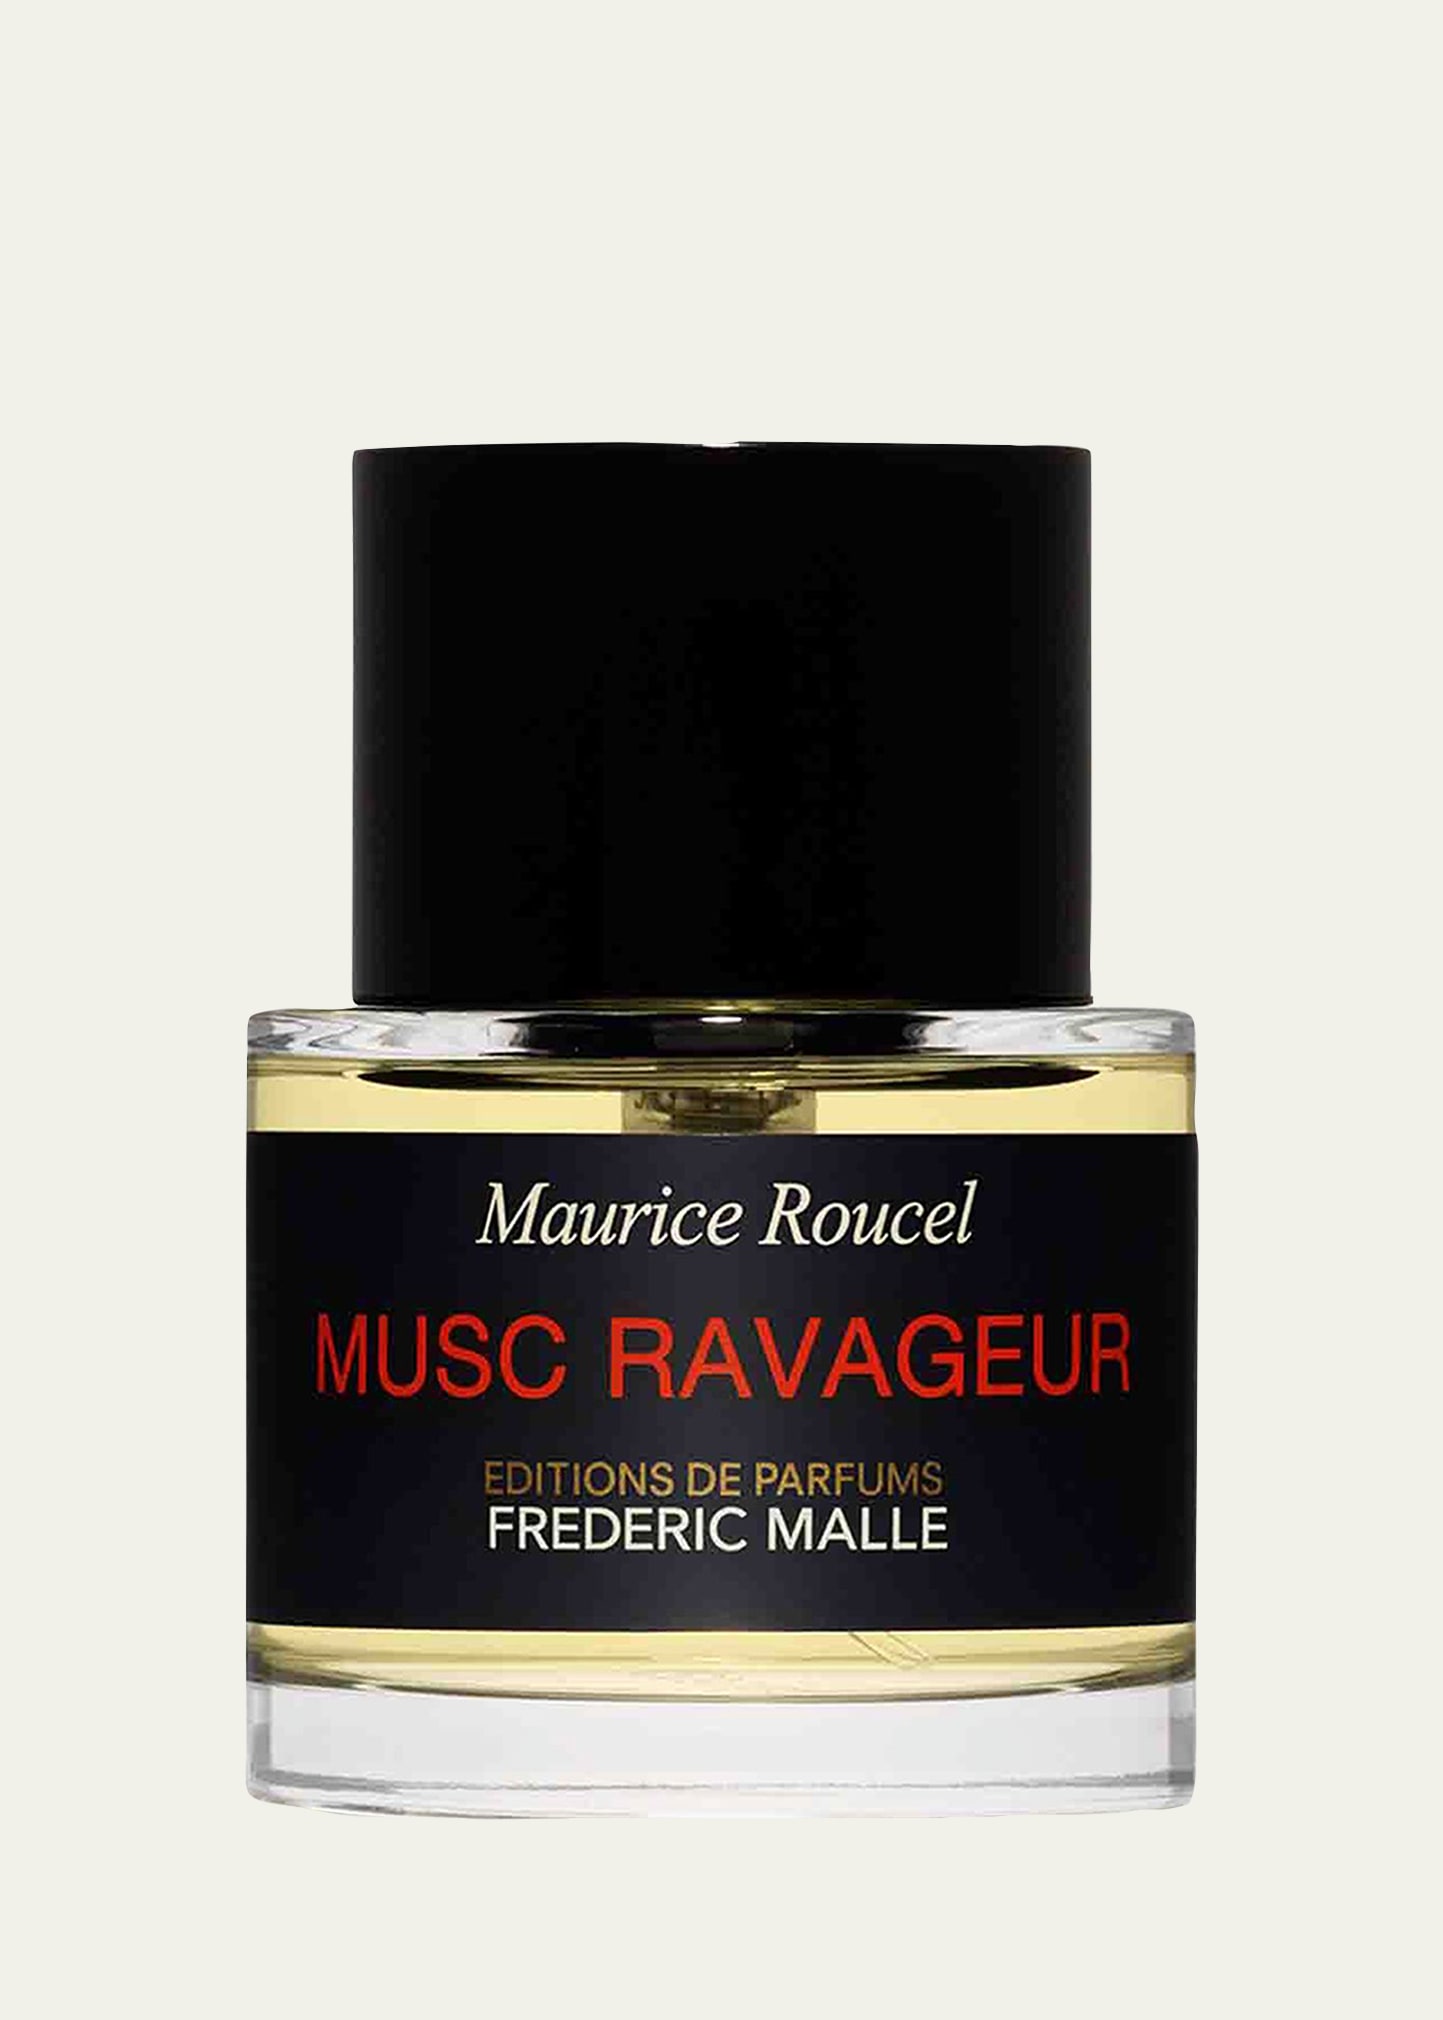 Editions De Parfums Frederic Malle Musc Ravageur Perfume, 1.7 Oz./ 50 ml In White